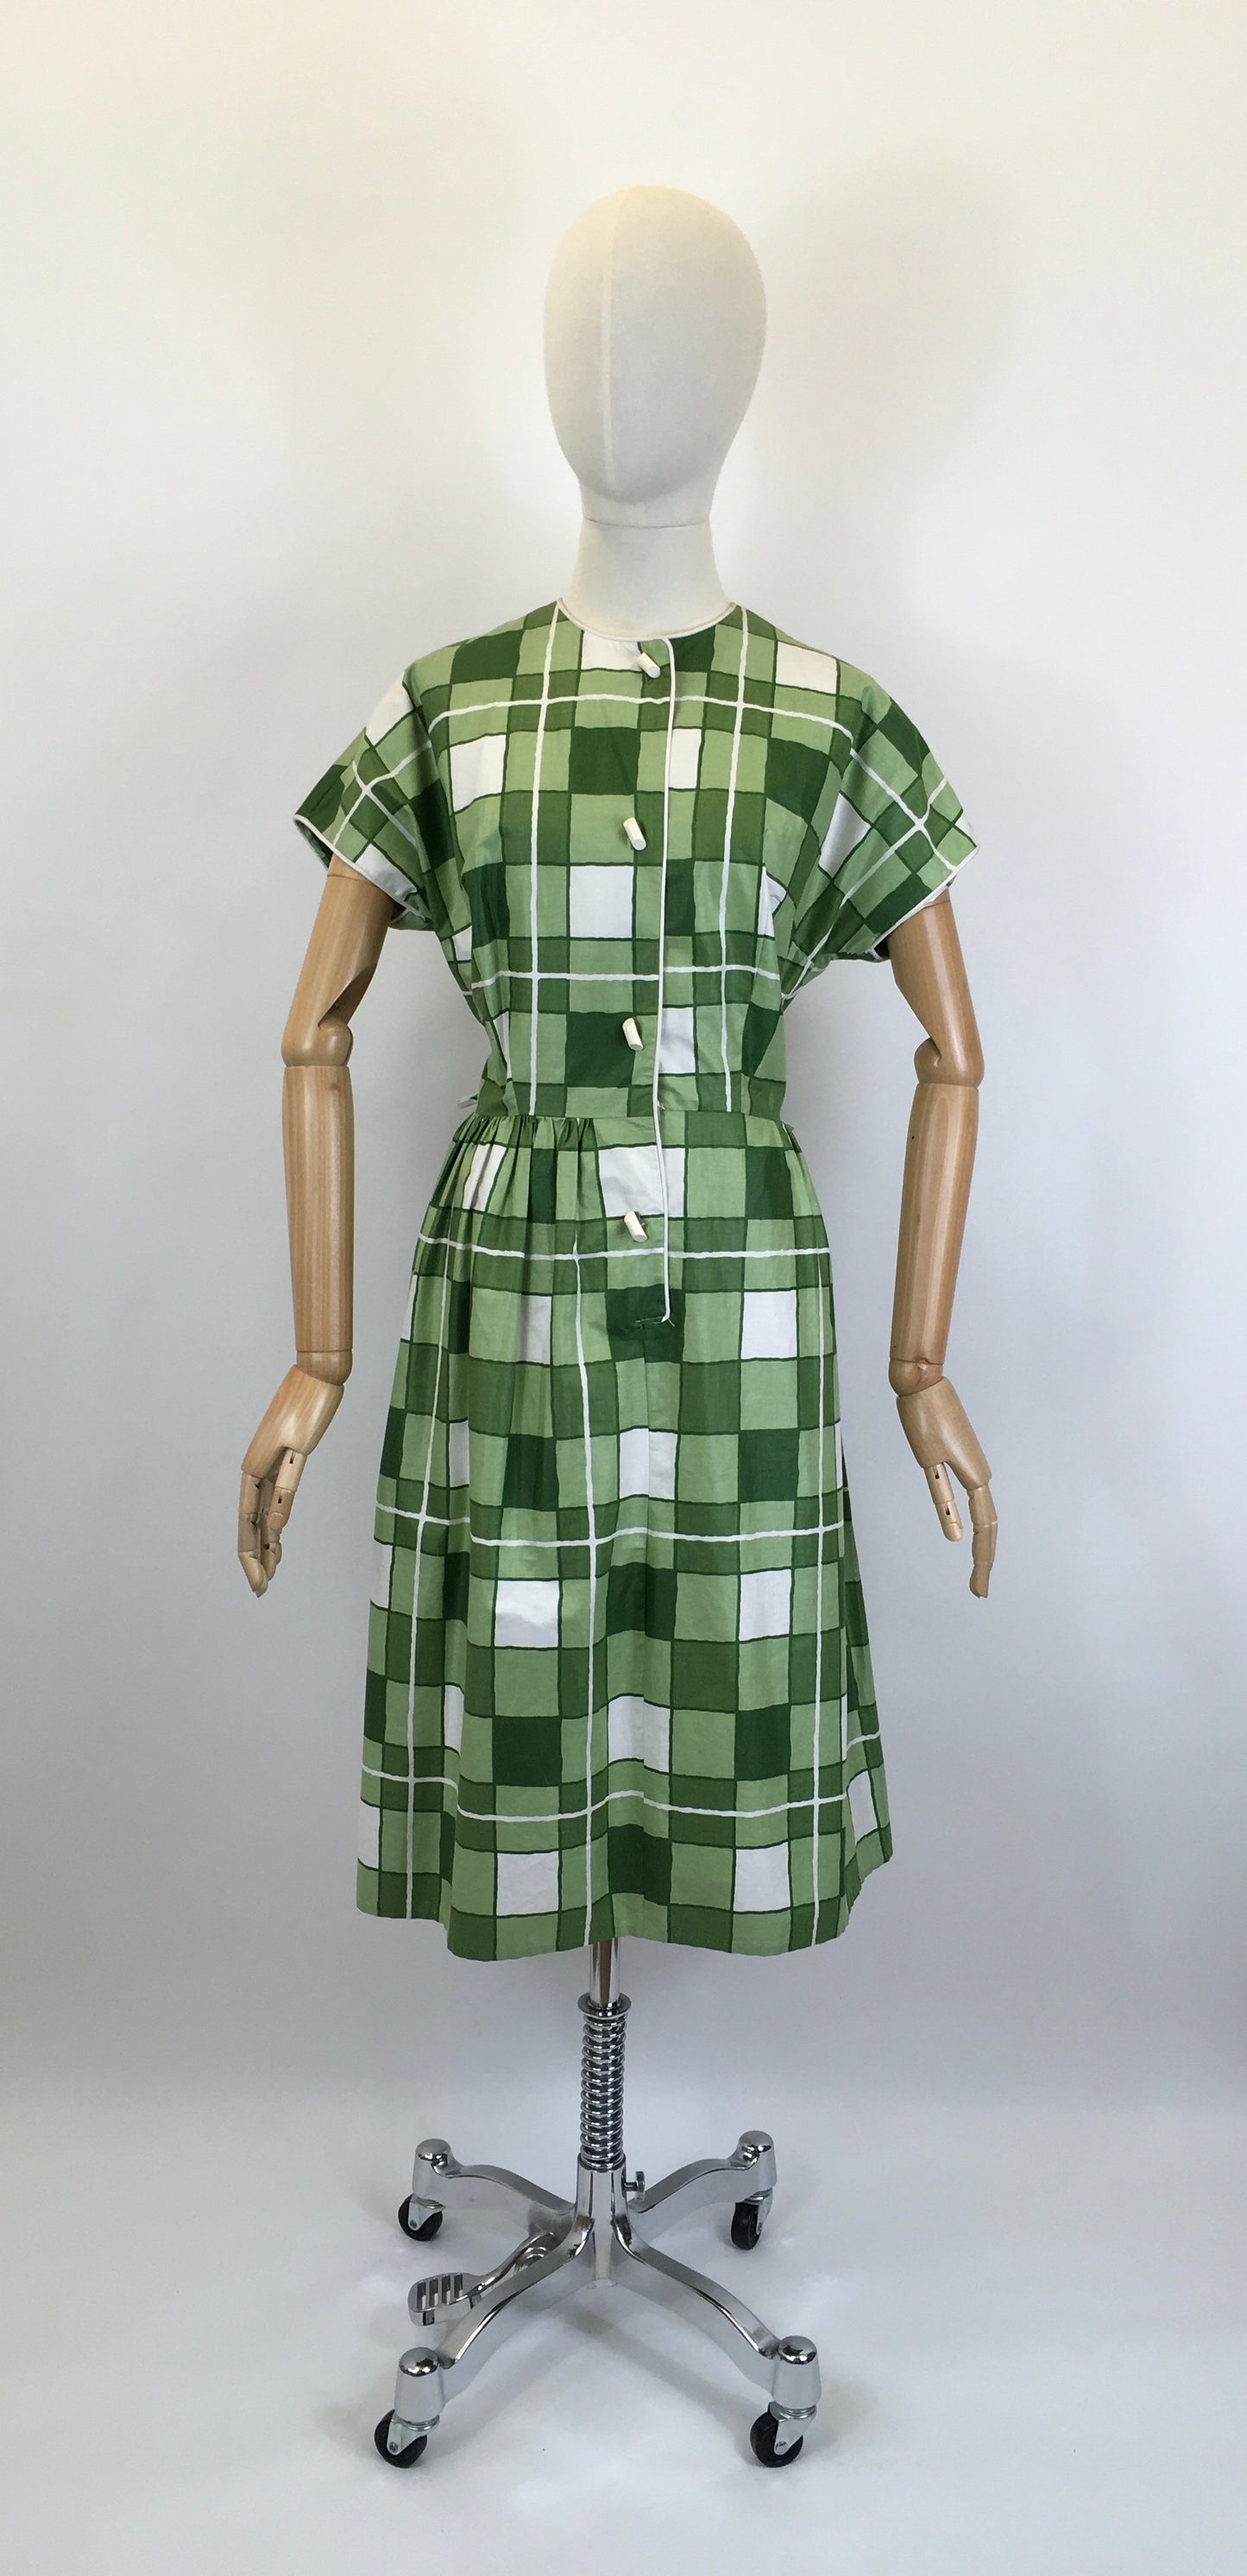 Original 1950's Darling Cotton Day Dress - In Shades of Green & White